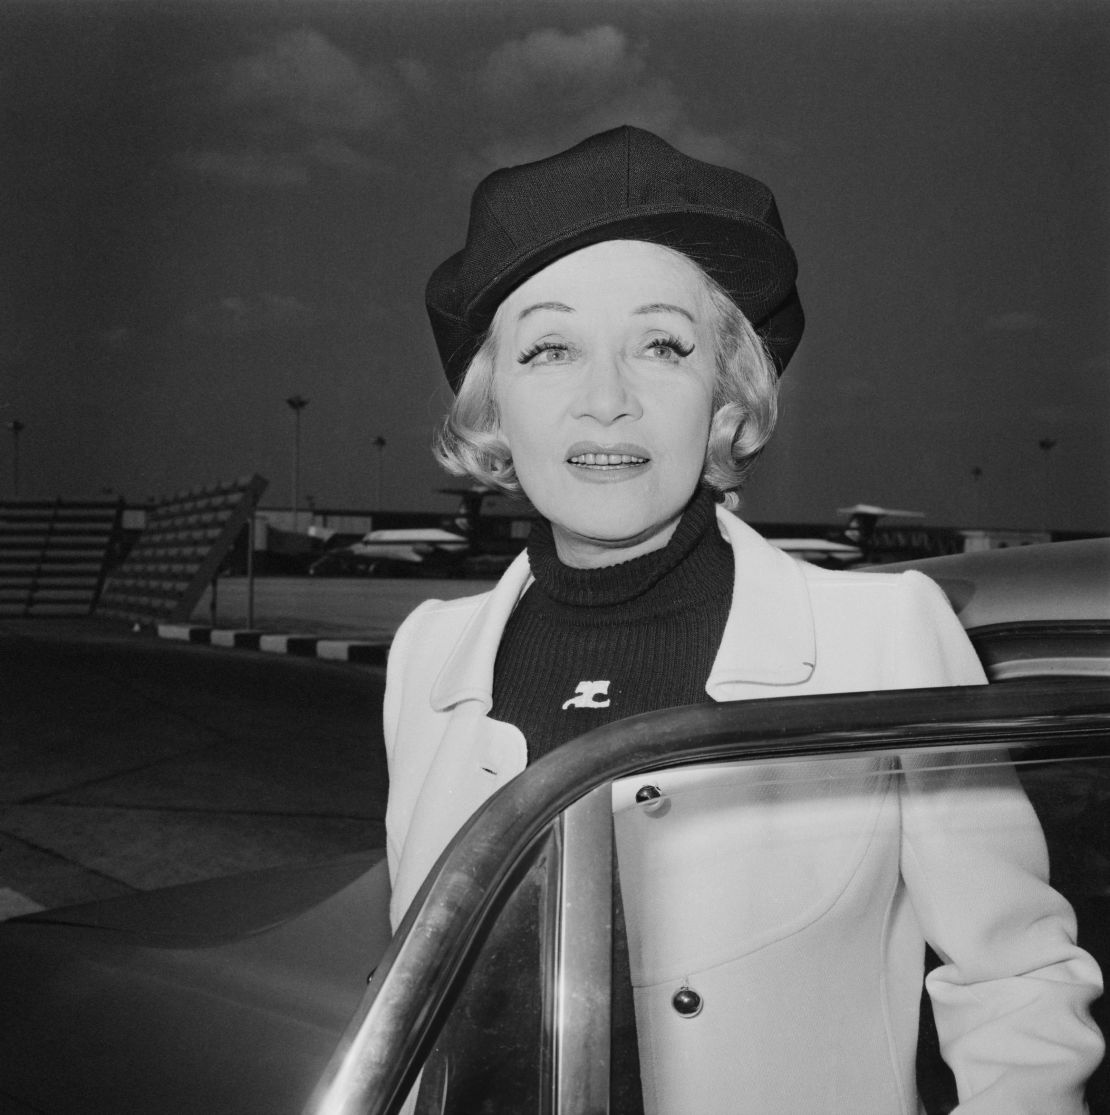 German actress Marlene Dietrich, pictured here in 1971, continued to wear black turtlenecks in later life.